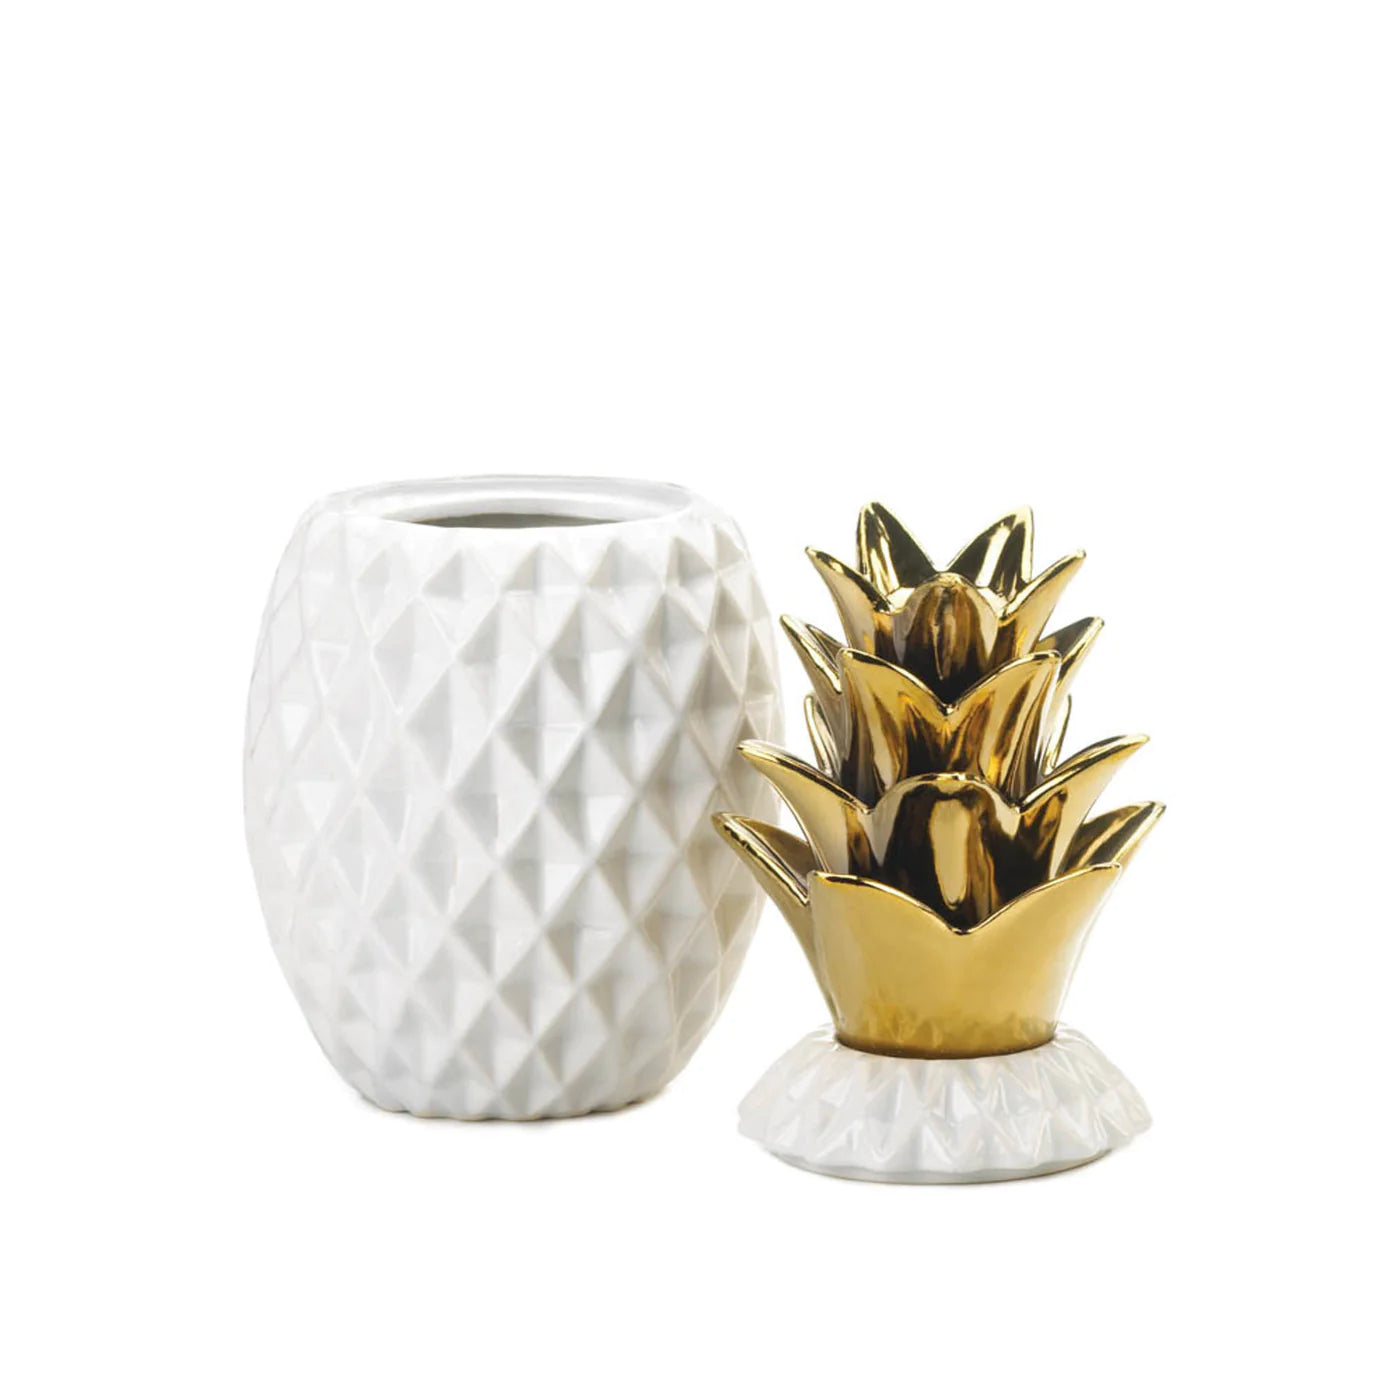 13" Gold Topped Pineapple Jar